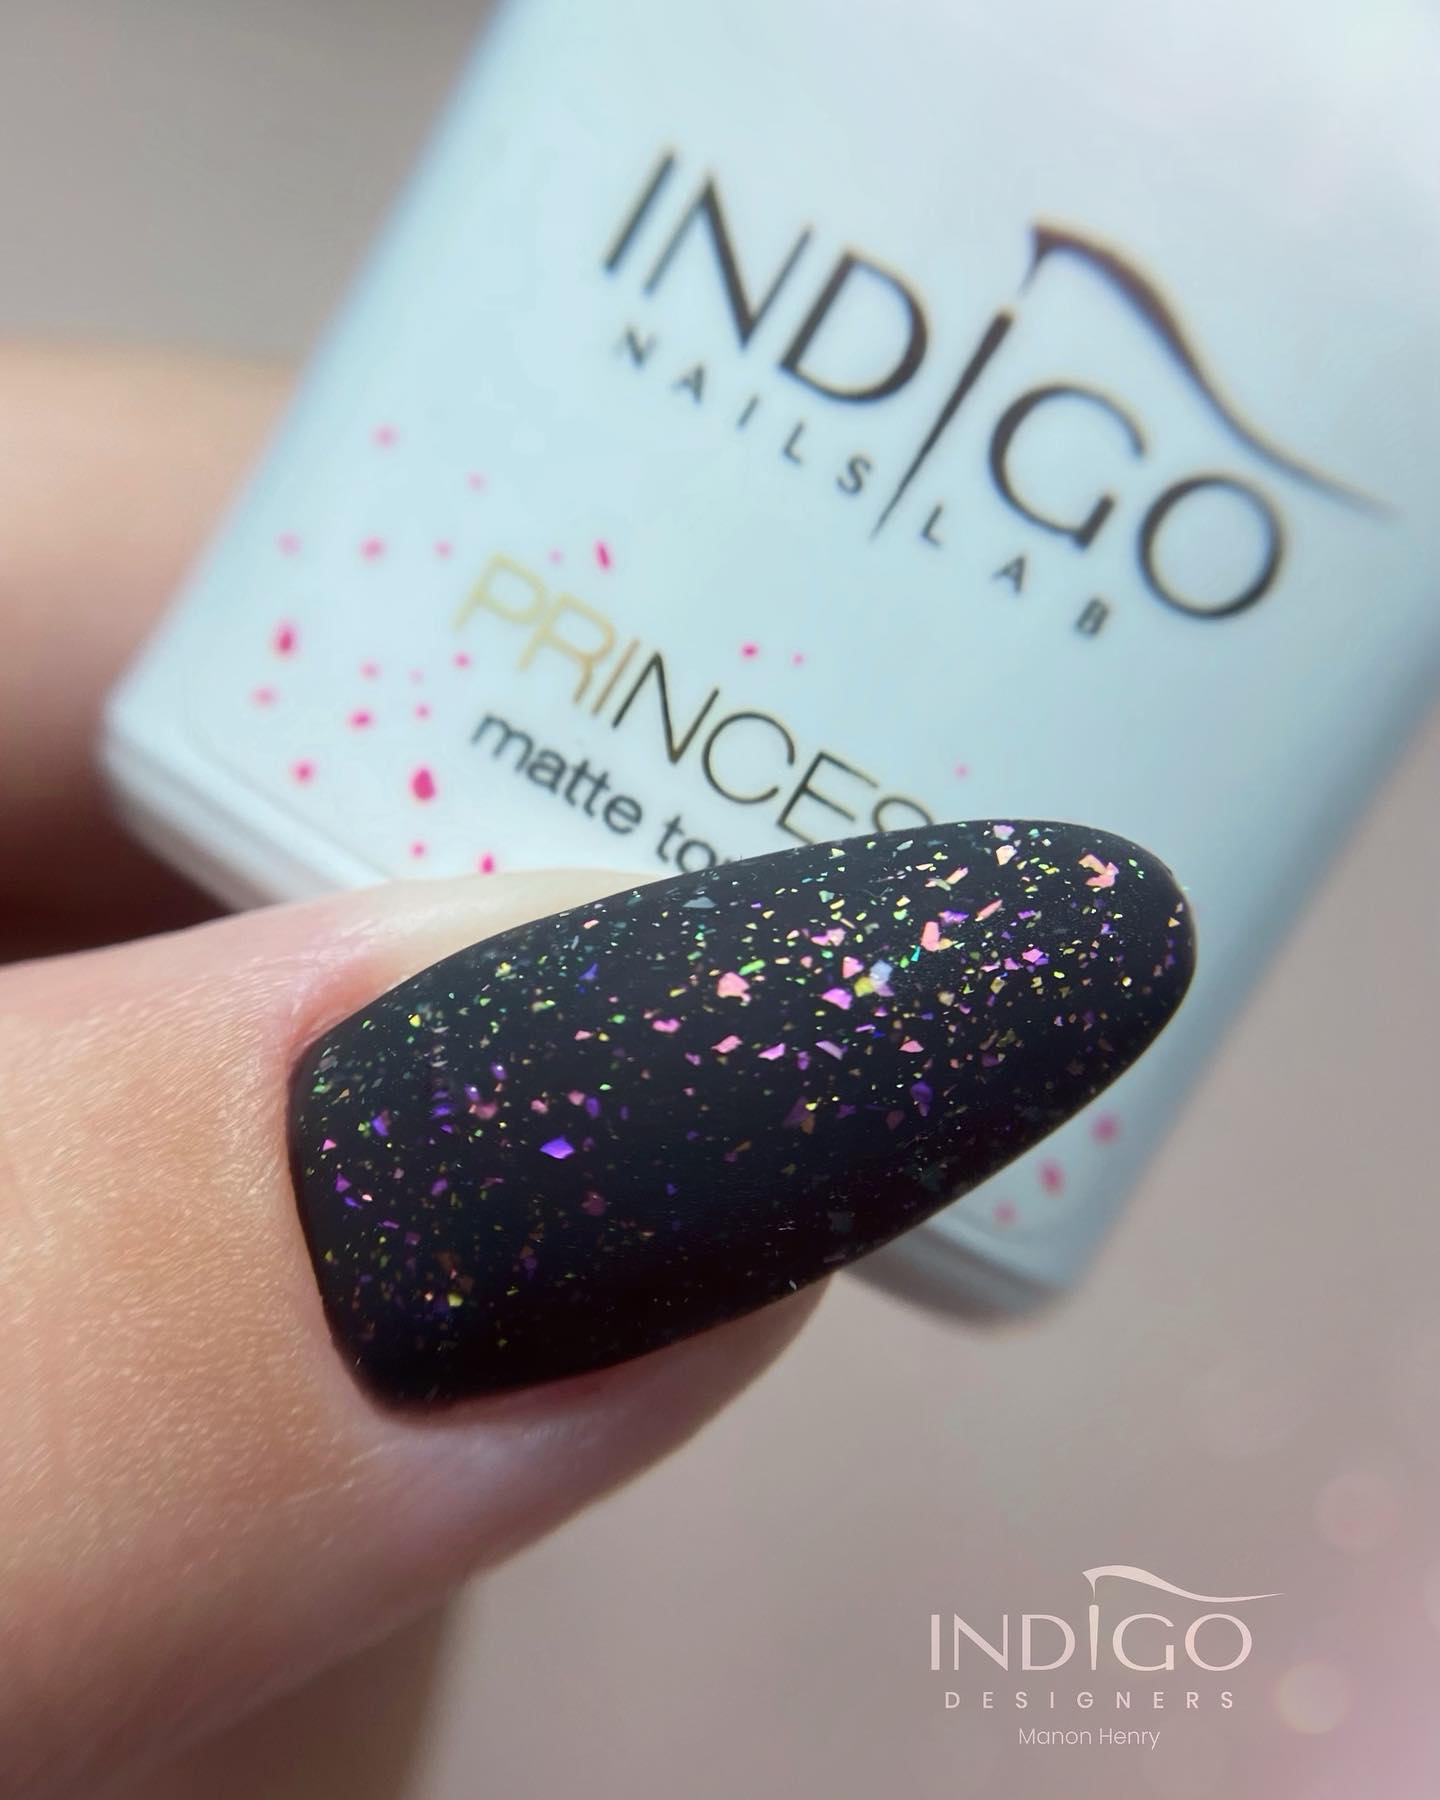 Long almond nails are always a favorite but you can add an extra beauty with a black matte nail polish. Plus, some colorful glitter details can help you achieve a fabulous look.